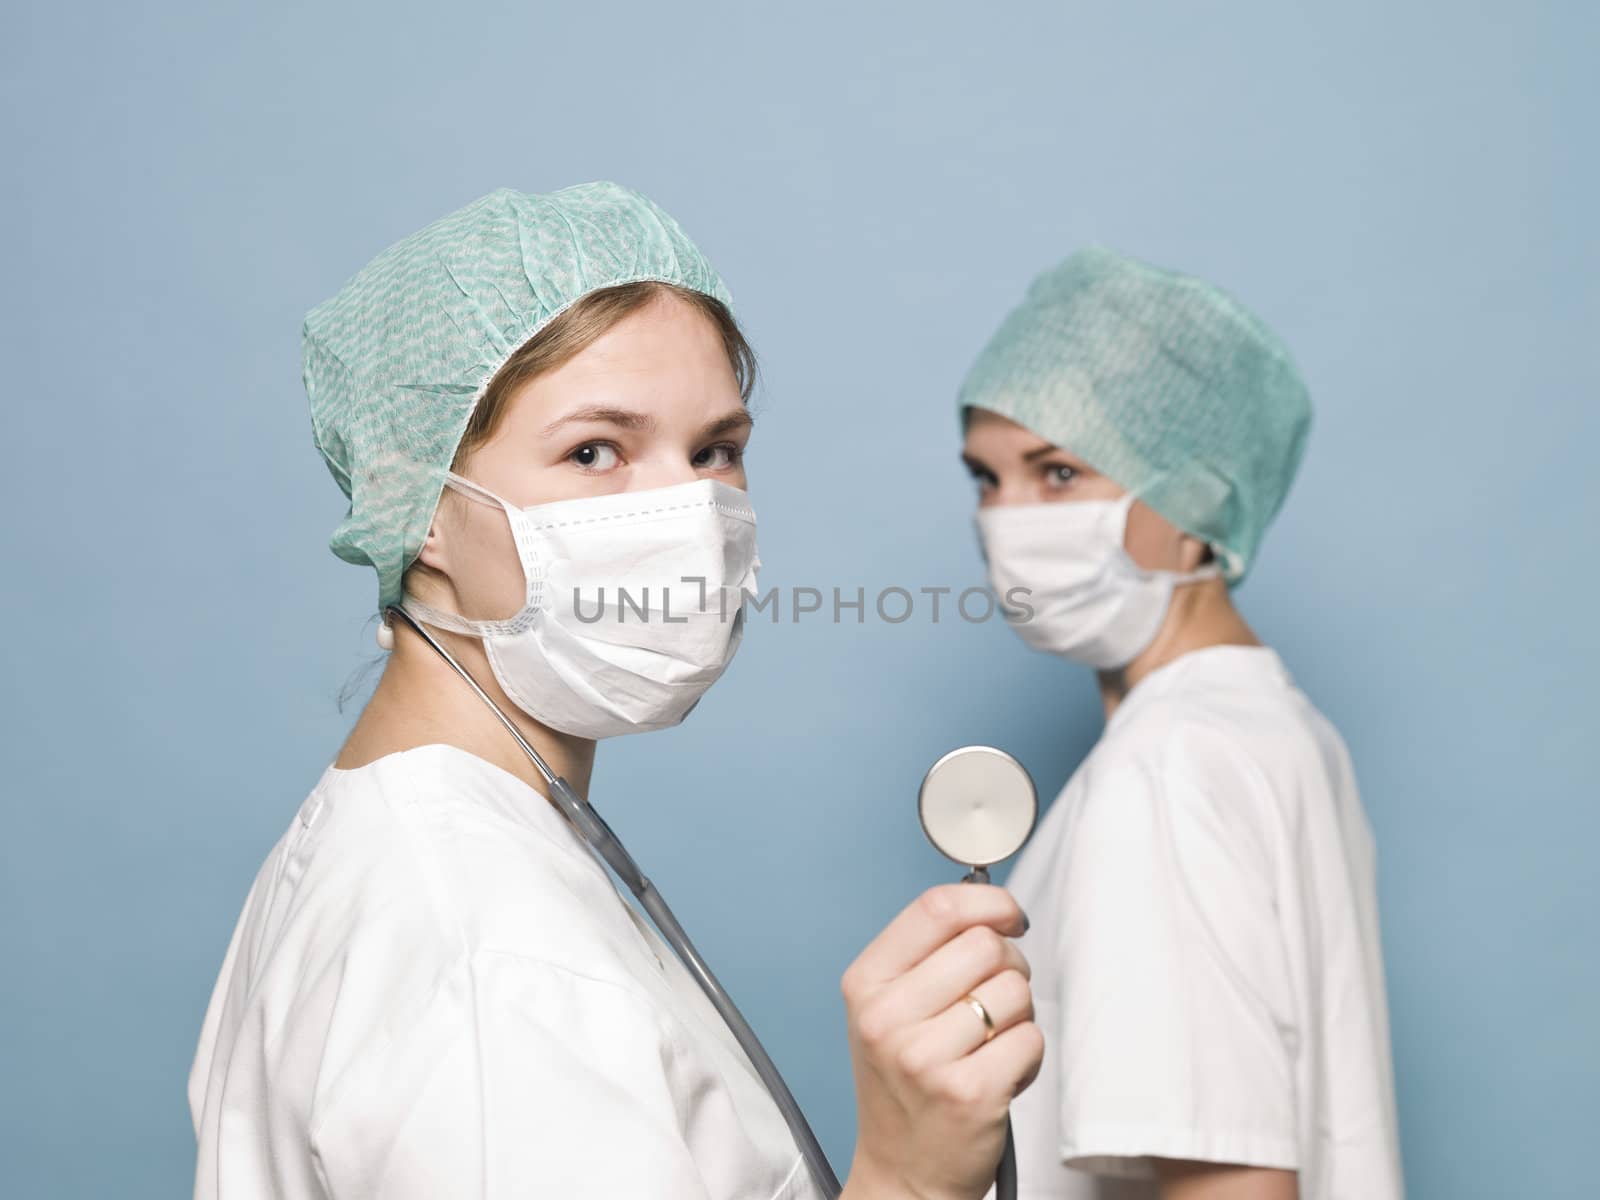 Two female nurses with surgical masks and a stethoscope